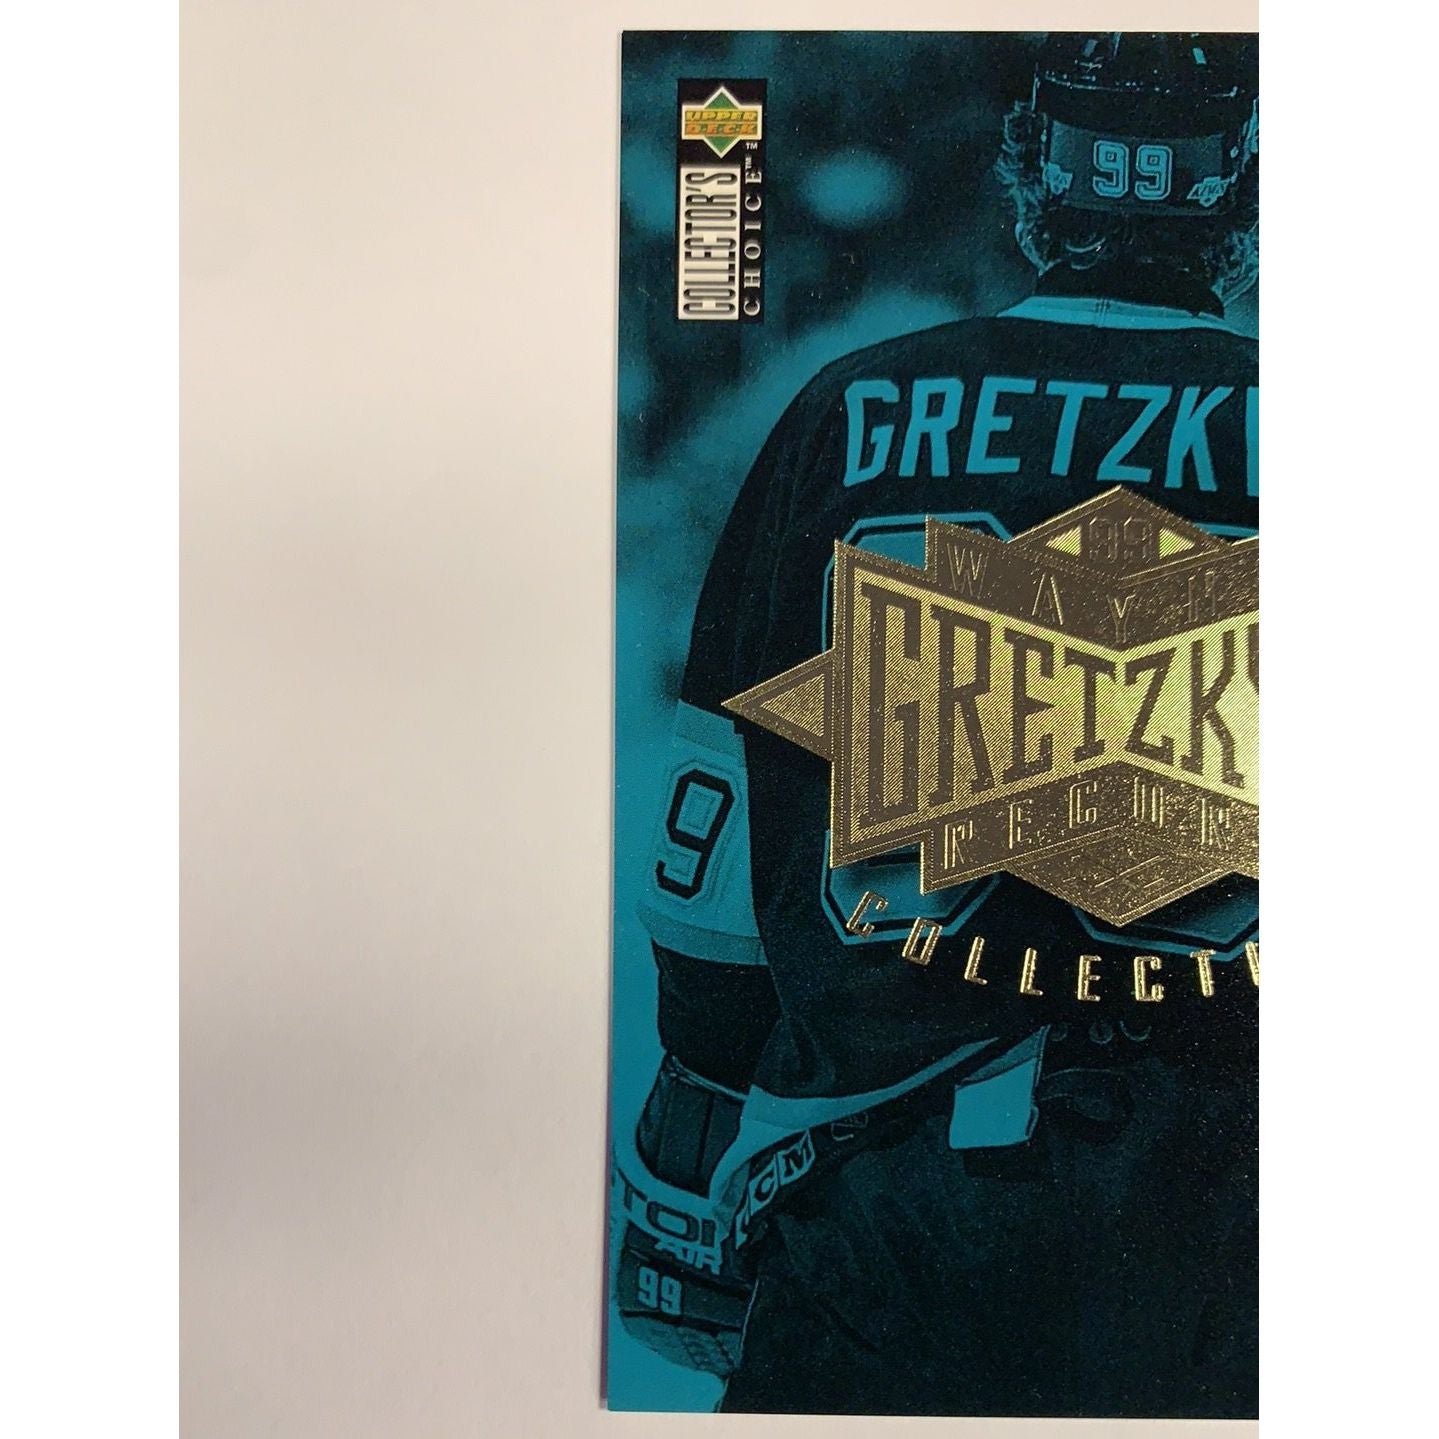  1995 Upper Deck Collectors Choice Wayne Gretzkys Record Collection Header  Local Legends Cards & Collectibles